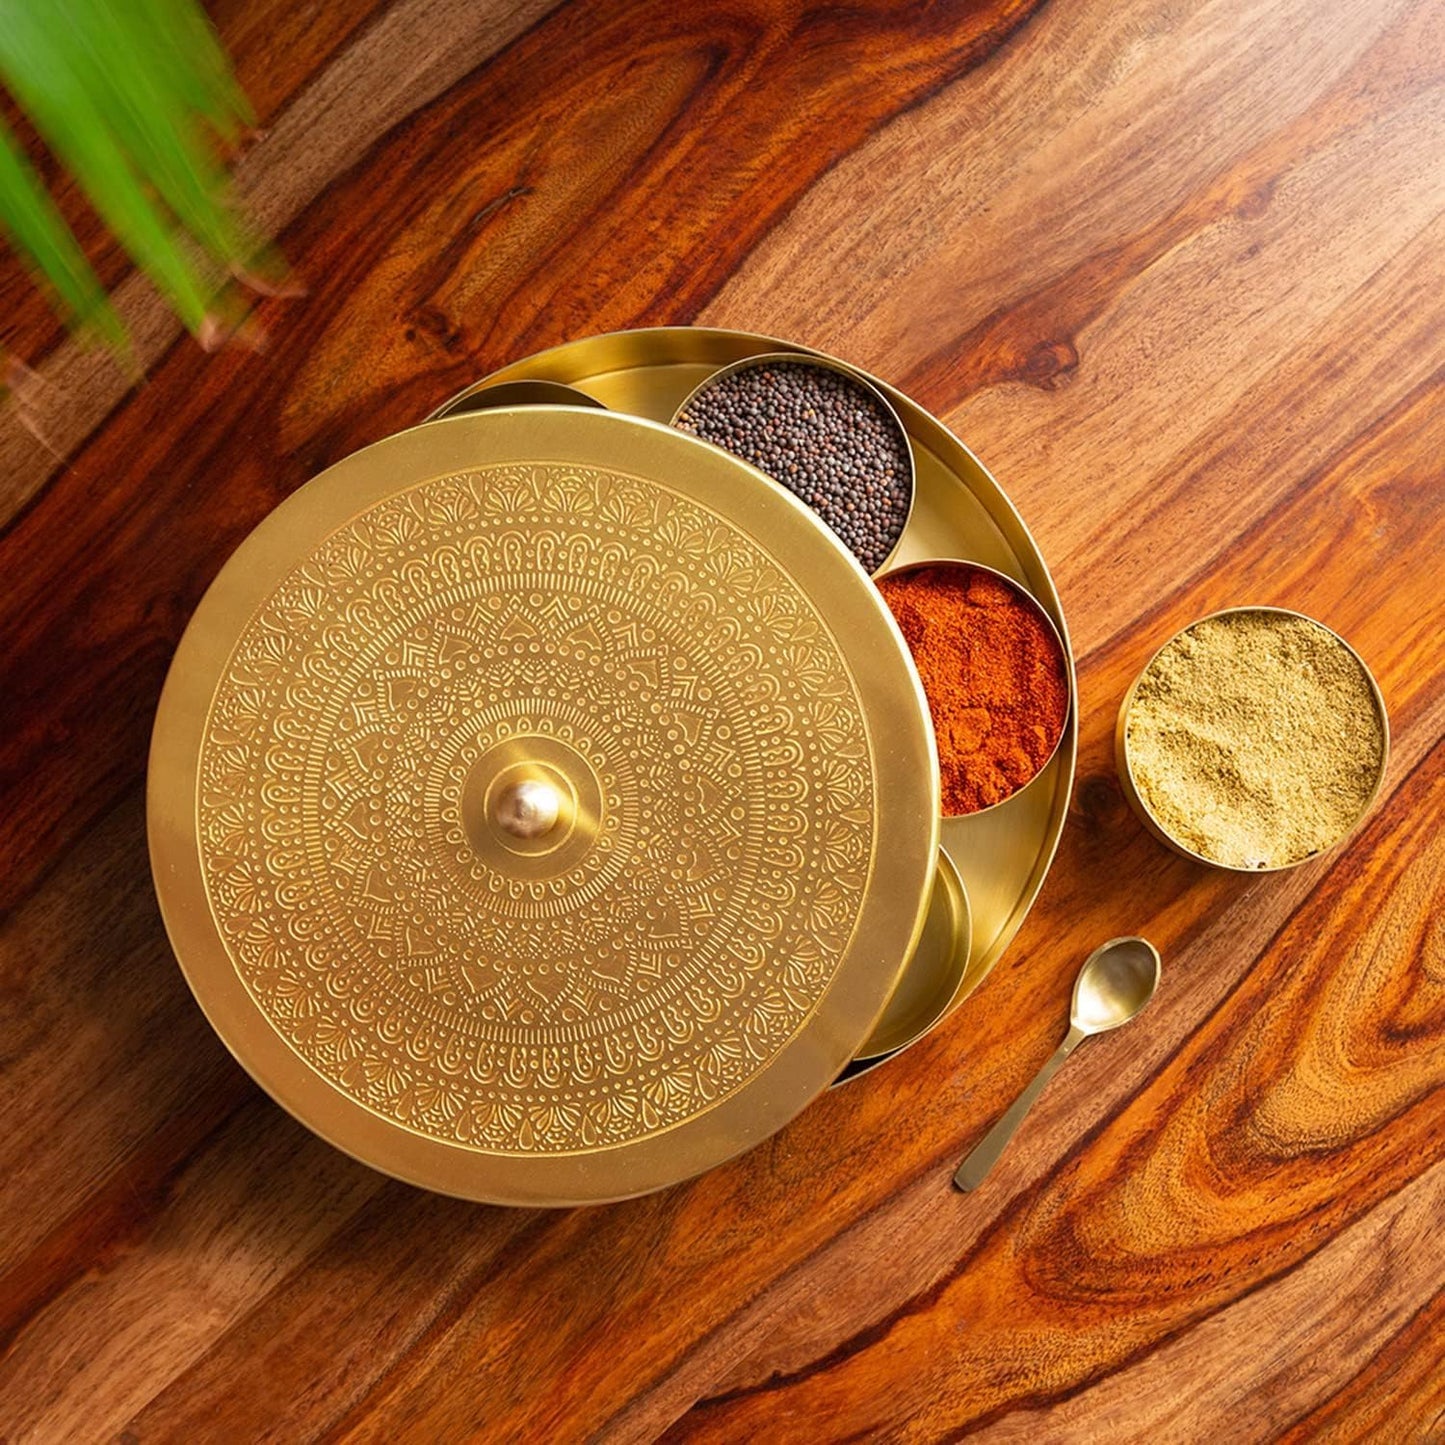 Brass Spice Box for Kichten with 7 Container and Spoon | Original Brass Spice Box Masaladani Set with Lid | Handmade Golden Embossed Masala Dani Spices Storage Conteainer Set